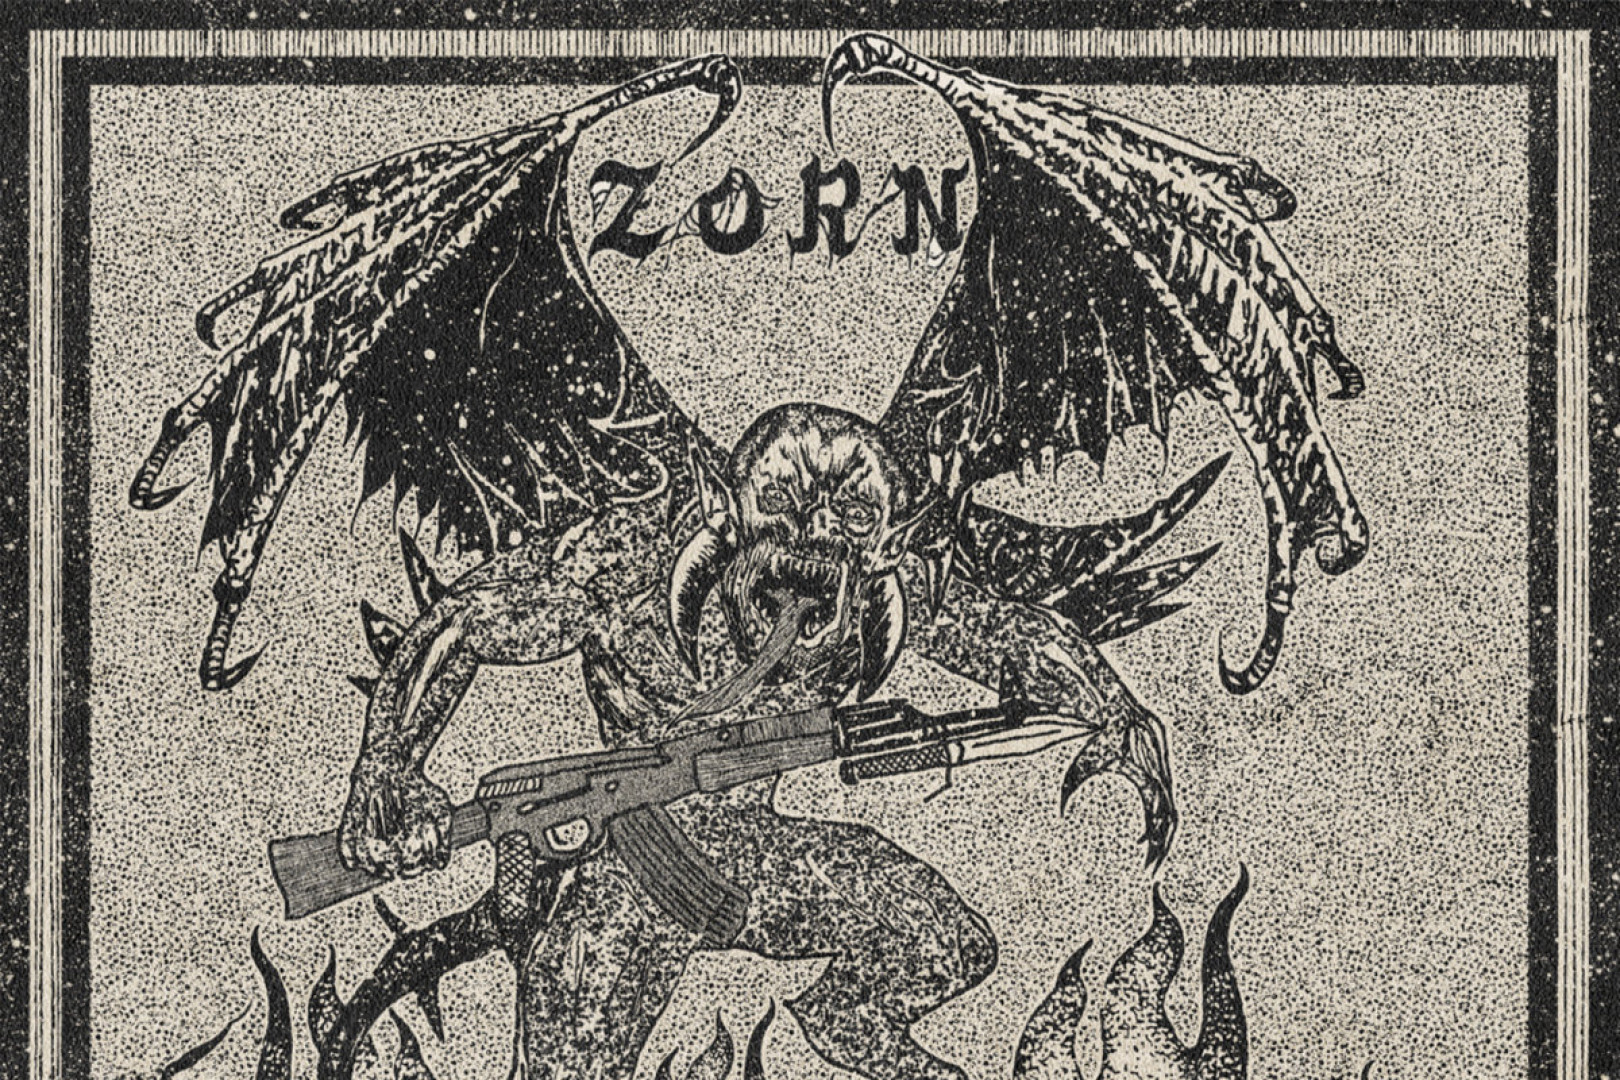 Zorn releases single, new details about LP